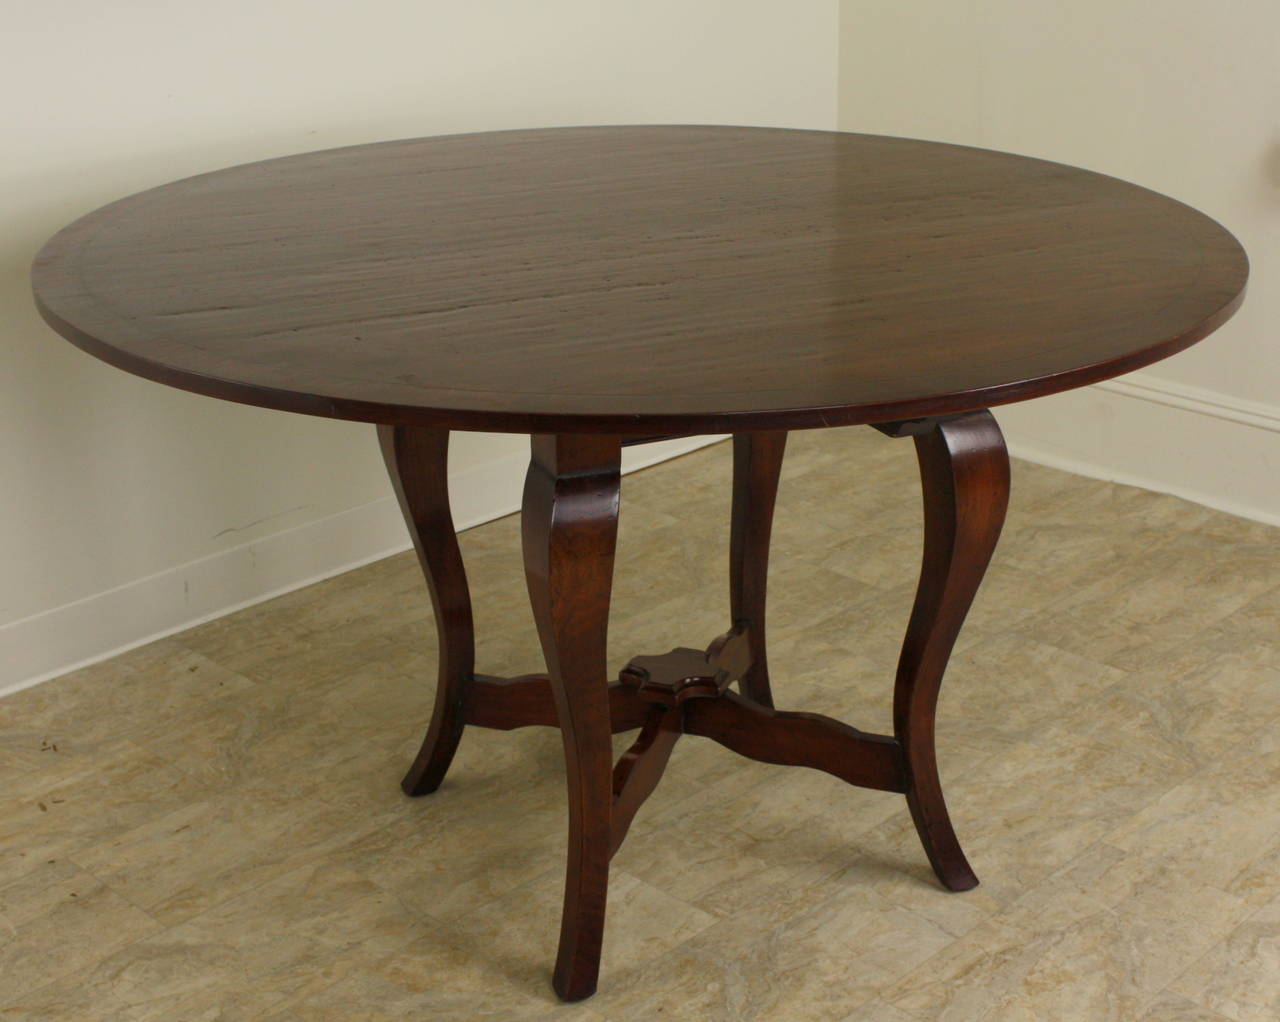 This custom made table is an elegant look, imported from England in a rich dark cherry with a very nice banding around the edge, delineated by a slender ebony stringing.  The color is lovely as is the grain and patina.  The four handsome criss-cross